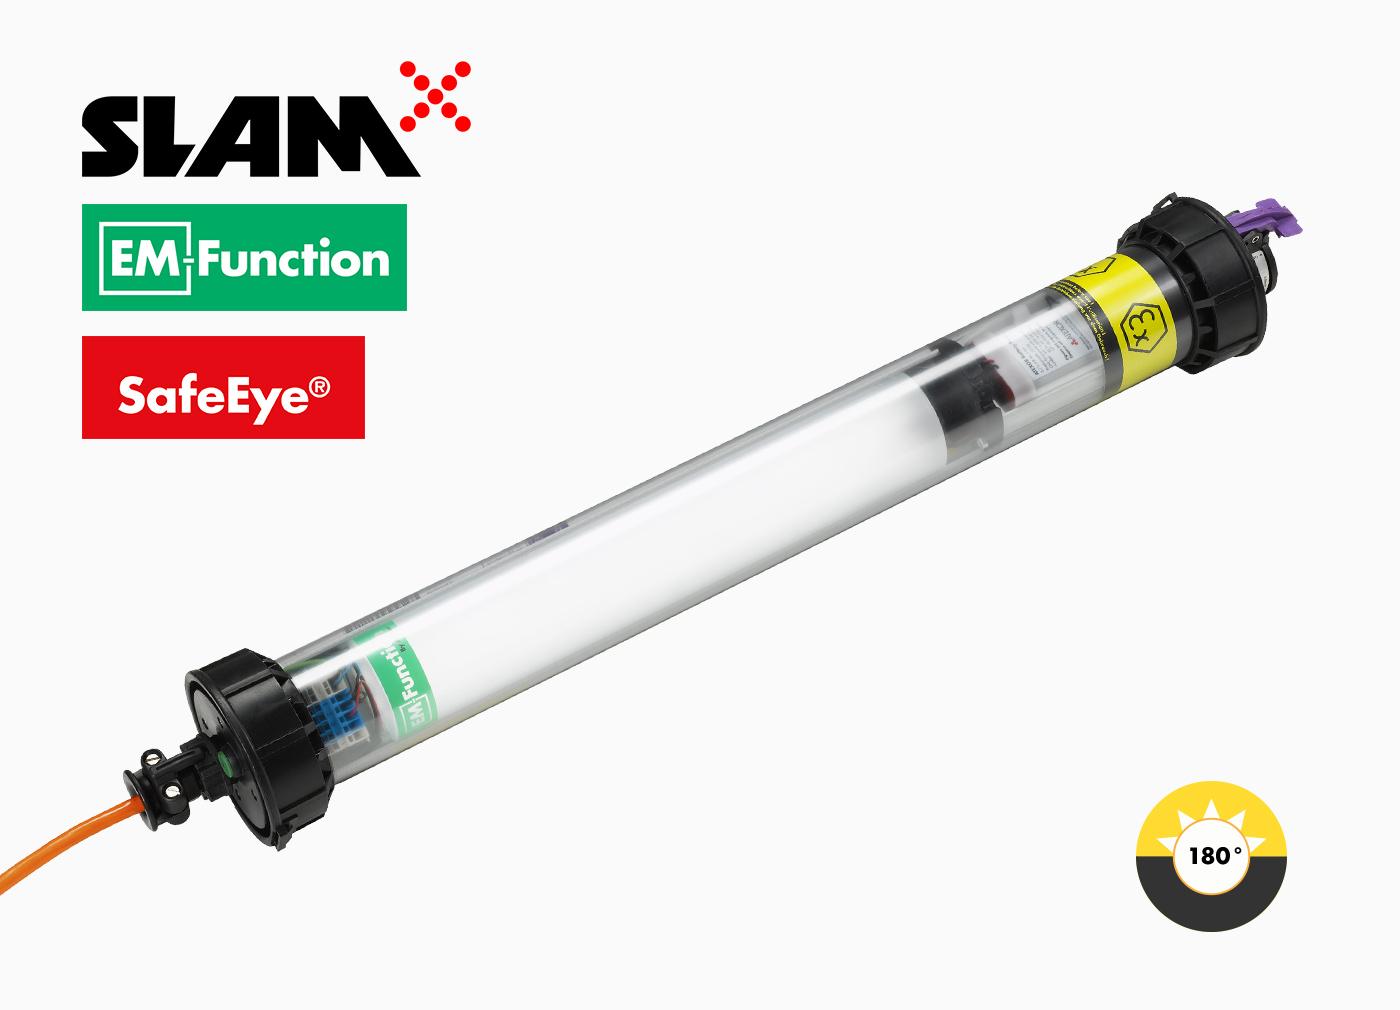 SLAM Hornet temporary Ex Area lighting with emergency function for safety.